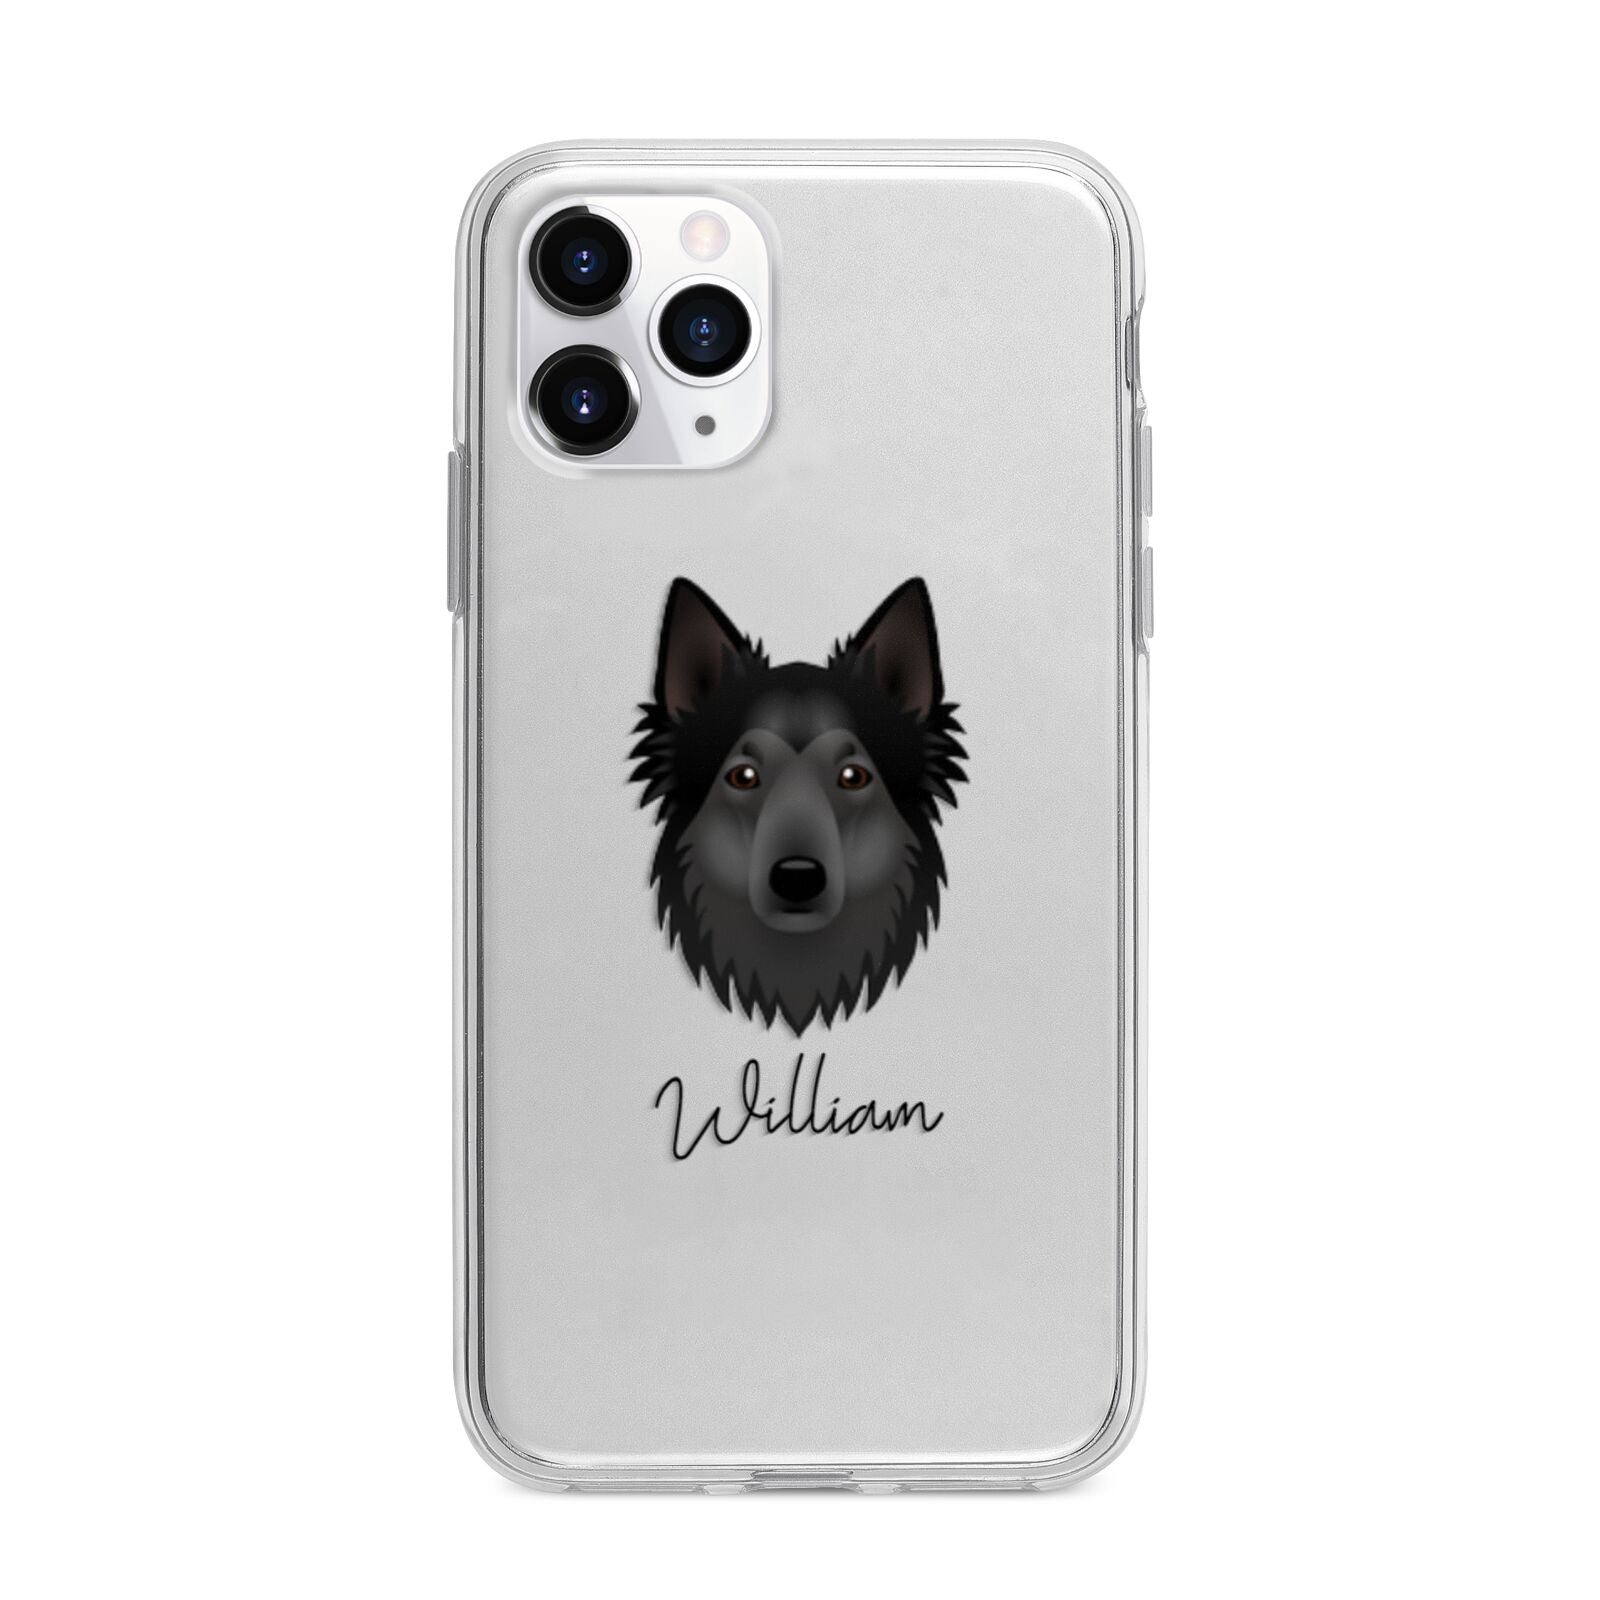 Shollie Personalised Apple iPhone 11 Pro in Silver with Bumper Case